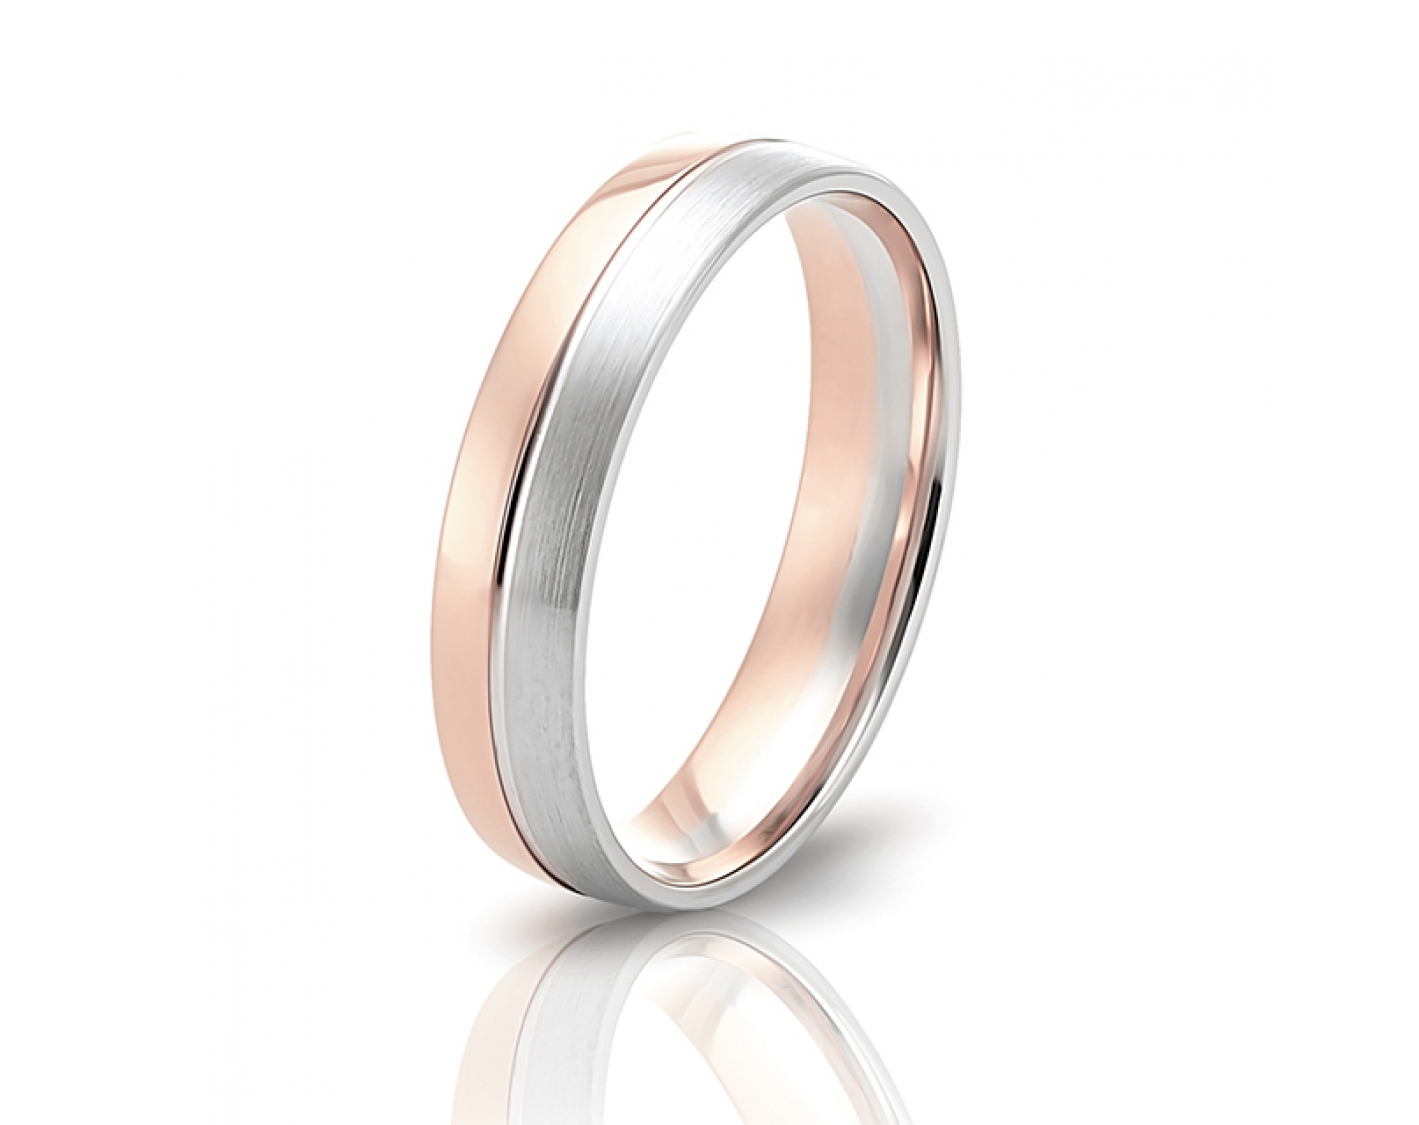 18k rose gold 5mm two-toned* wedding band